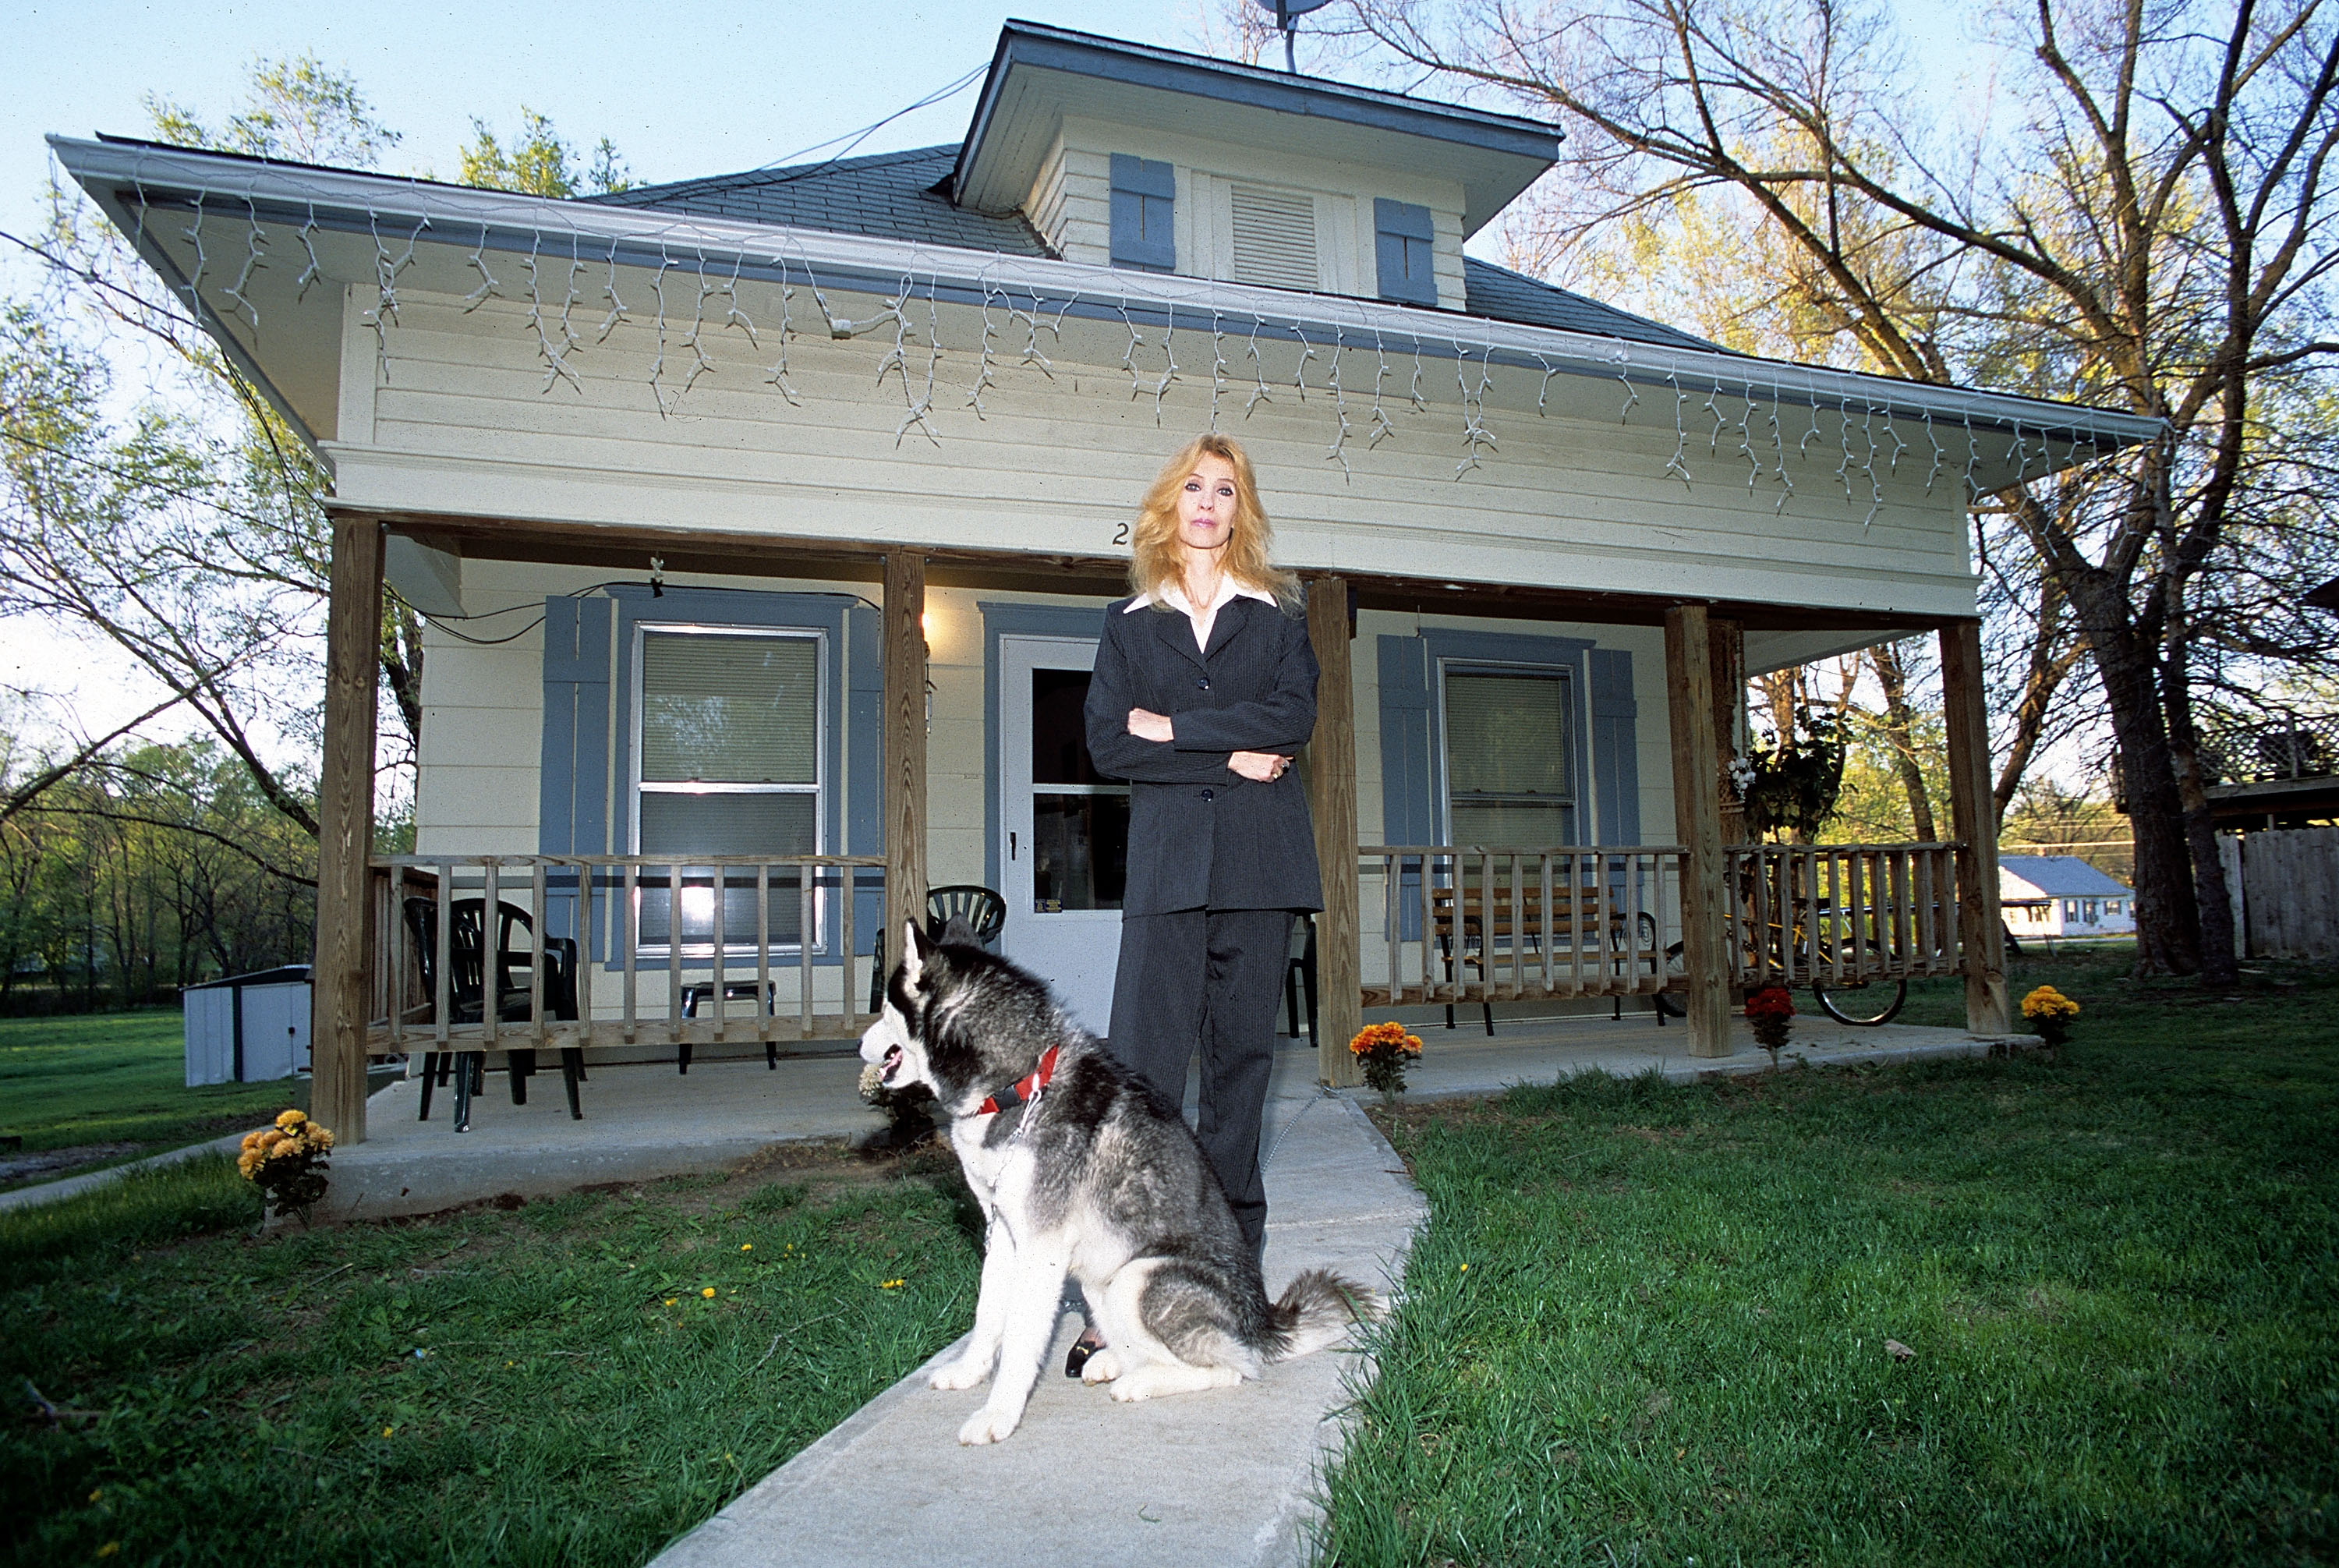 Eminem's mother Debbie Mathers during a portrait session outside her house in September, 2005 in Detroit, Michigan. | Source: Getty Images